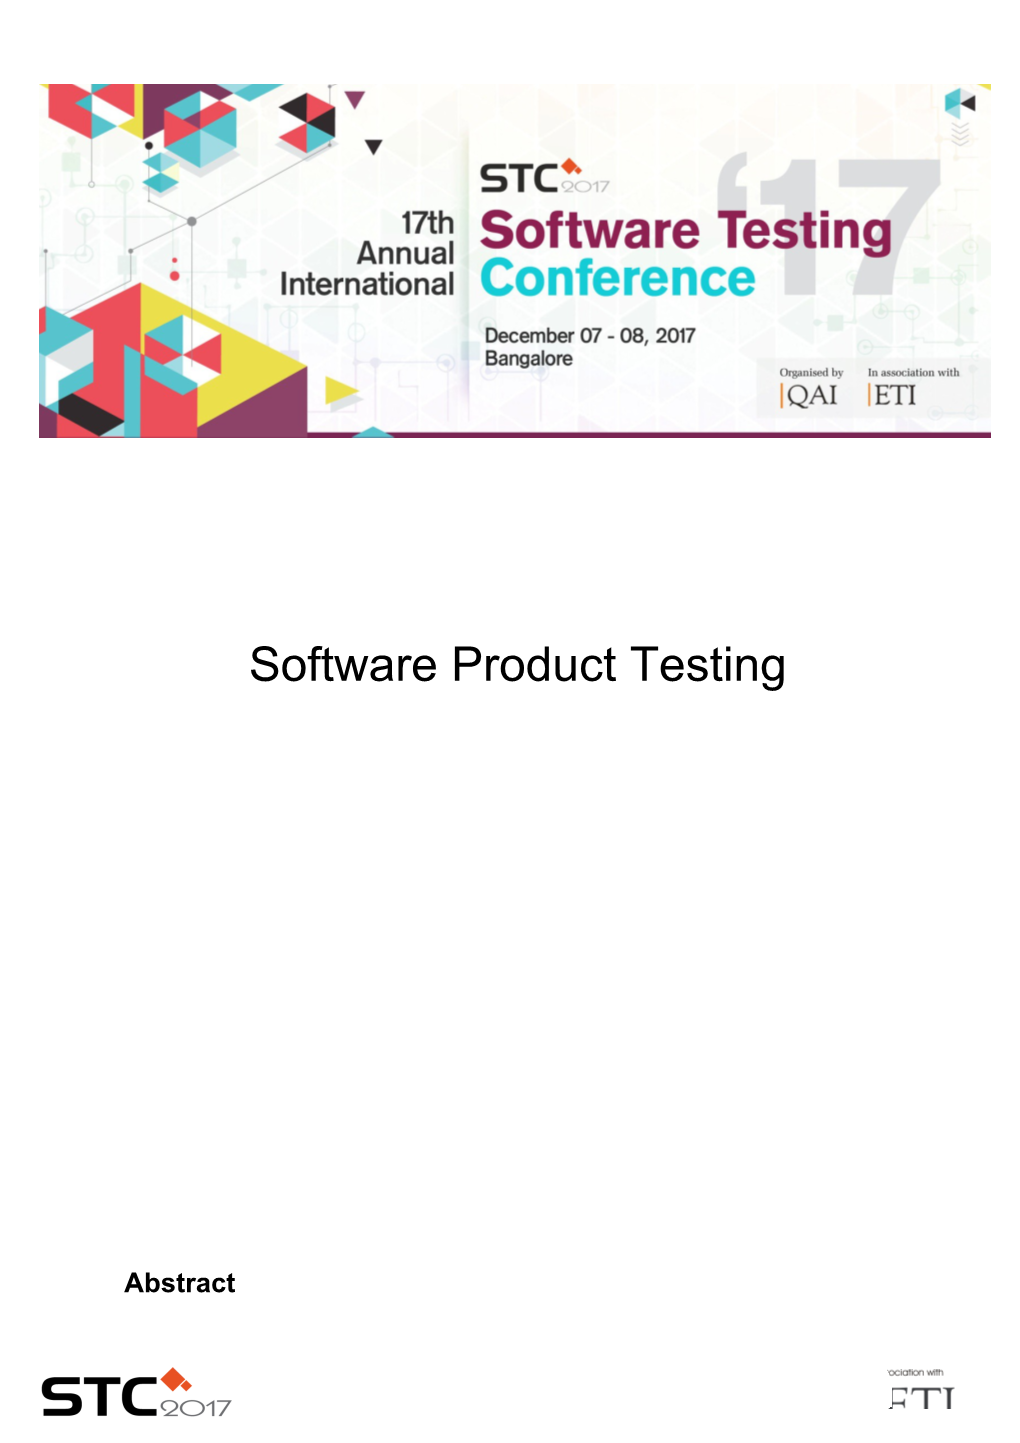 What Defers Product Testing from Application Testing?